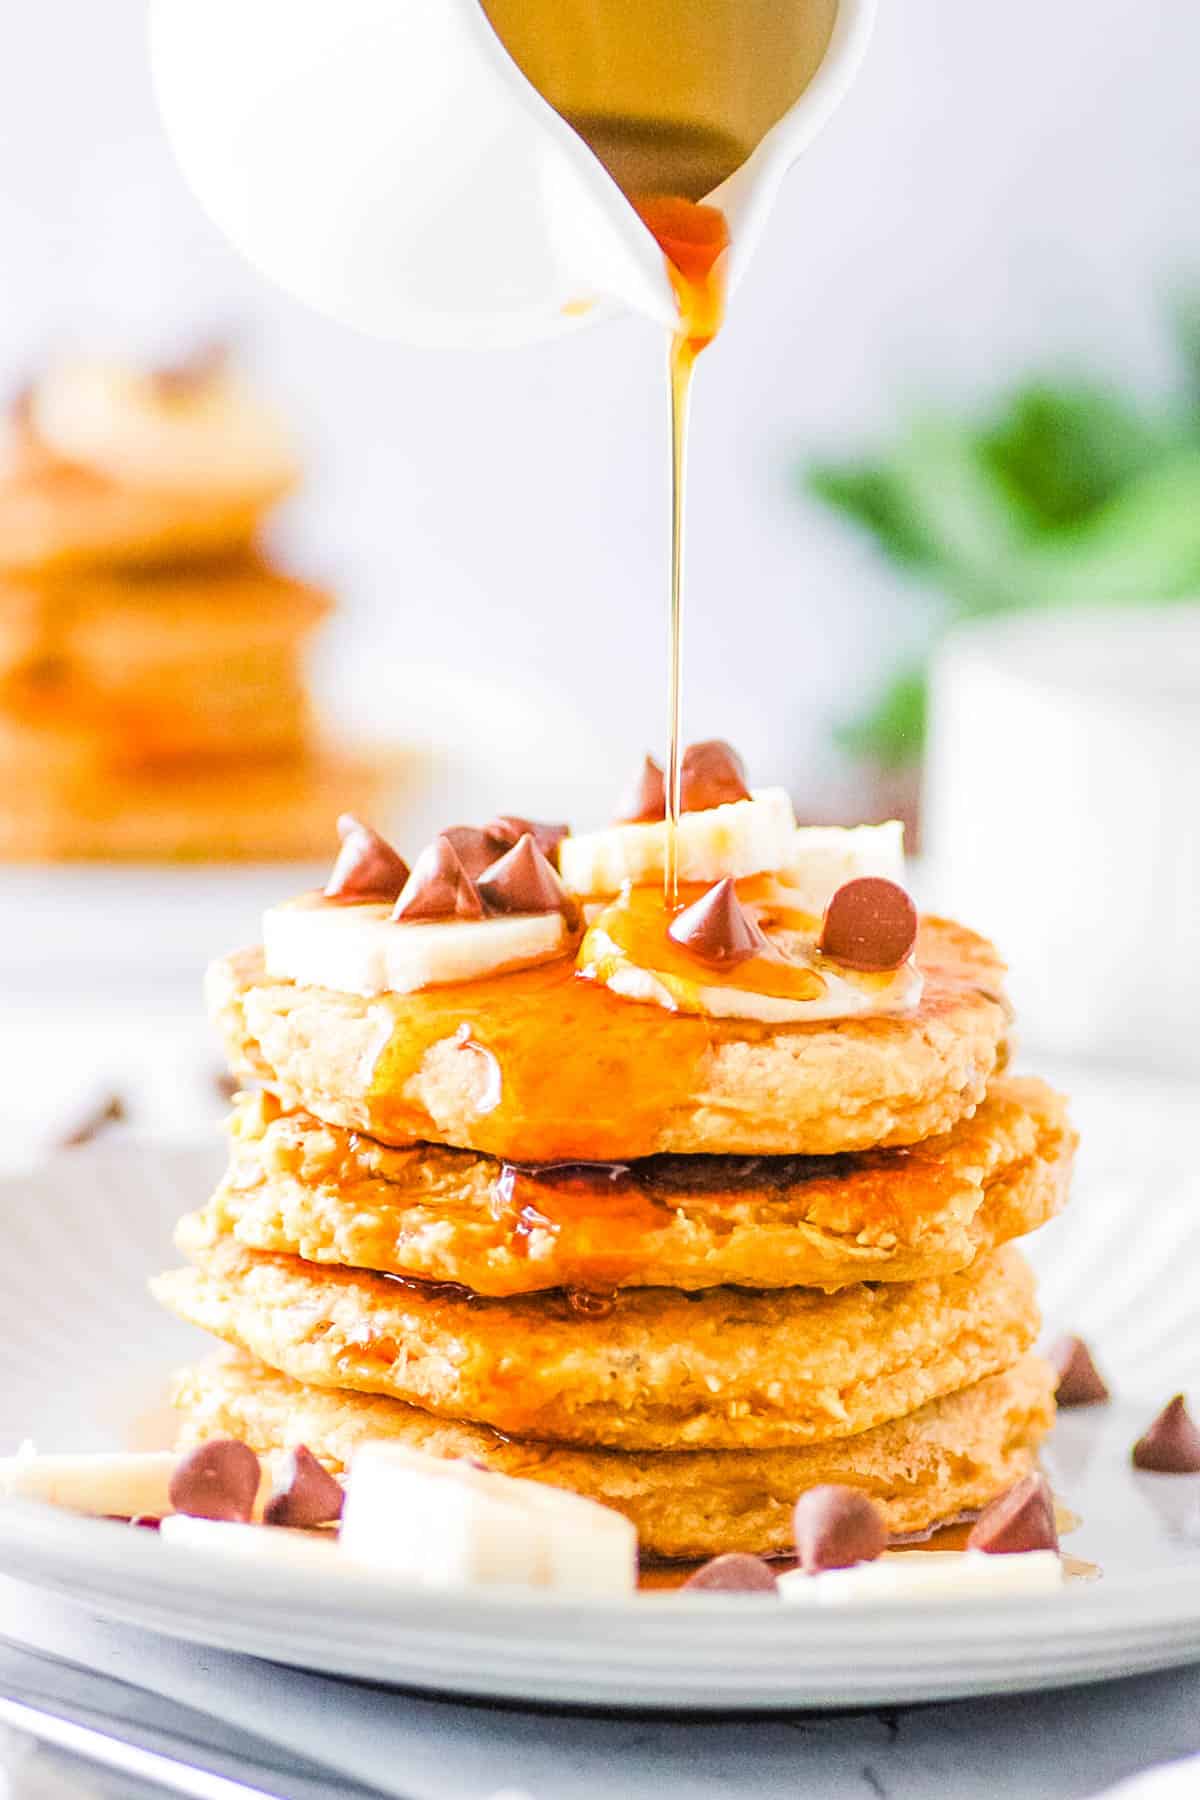 Stack of oat flour pancakes topped with c،colate chips, banana slices and maple syrup on a white plate.